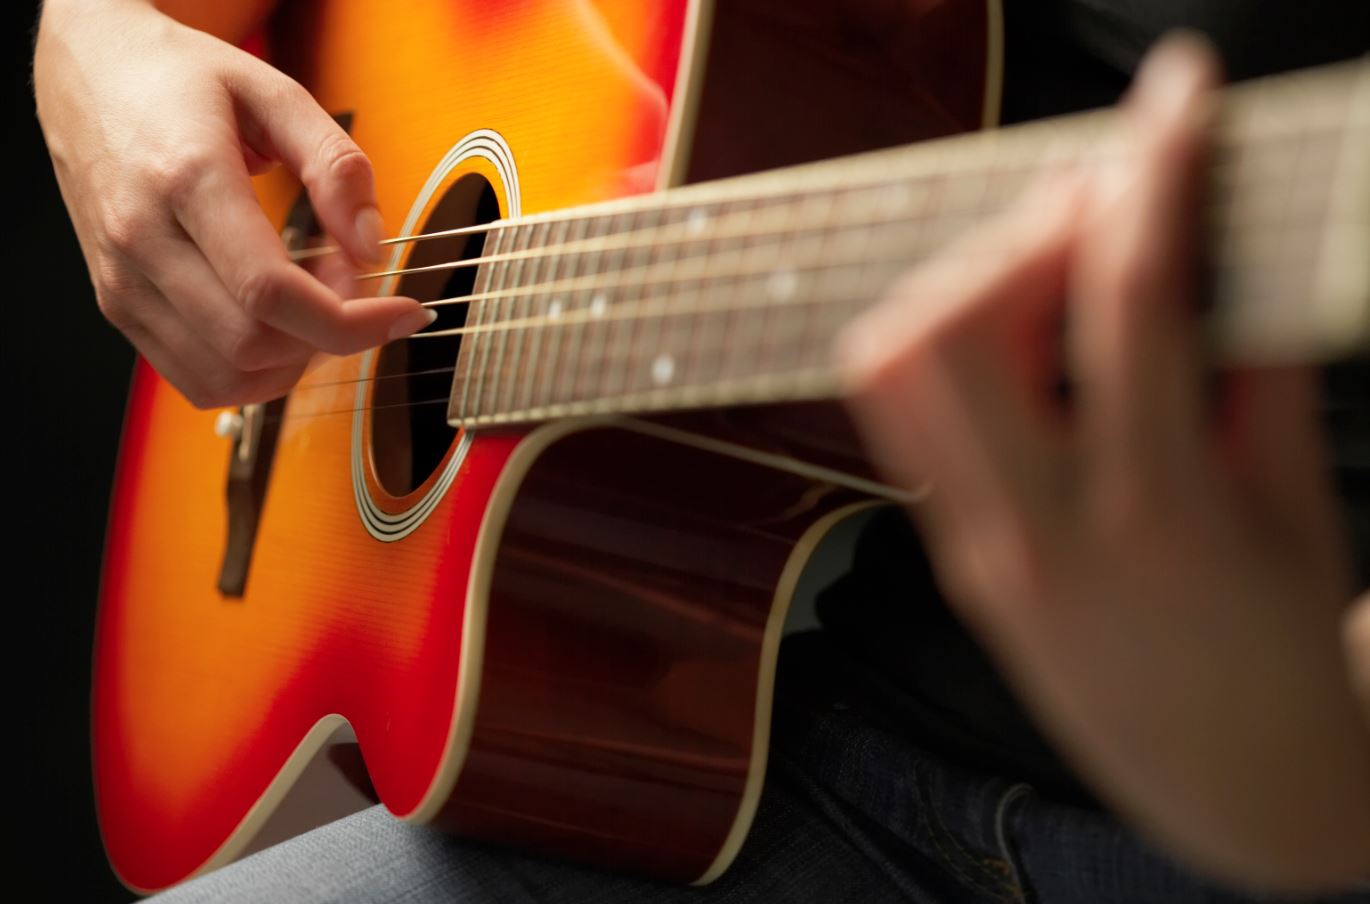 this picture shows a musician playing a guitar